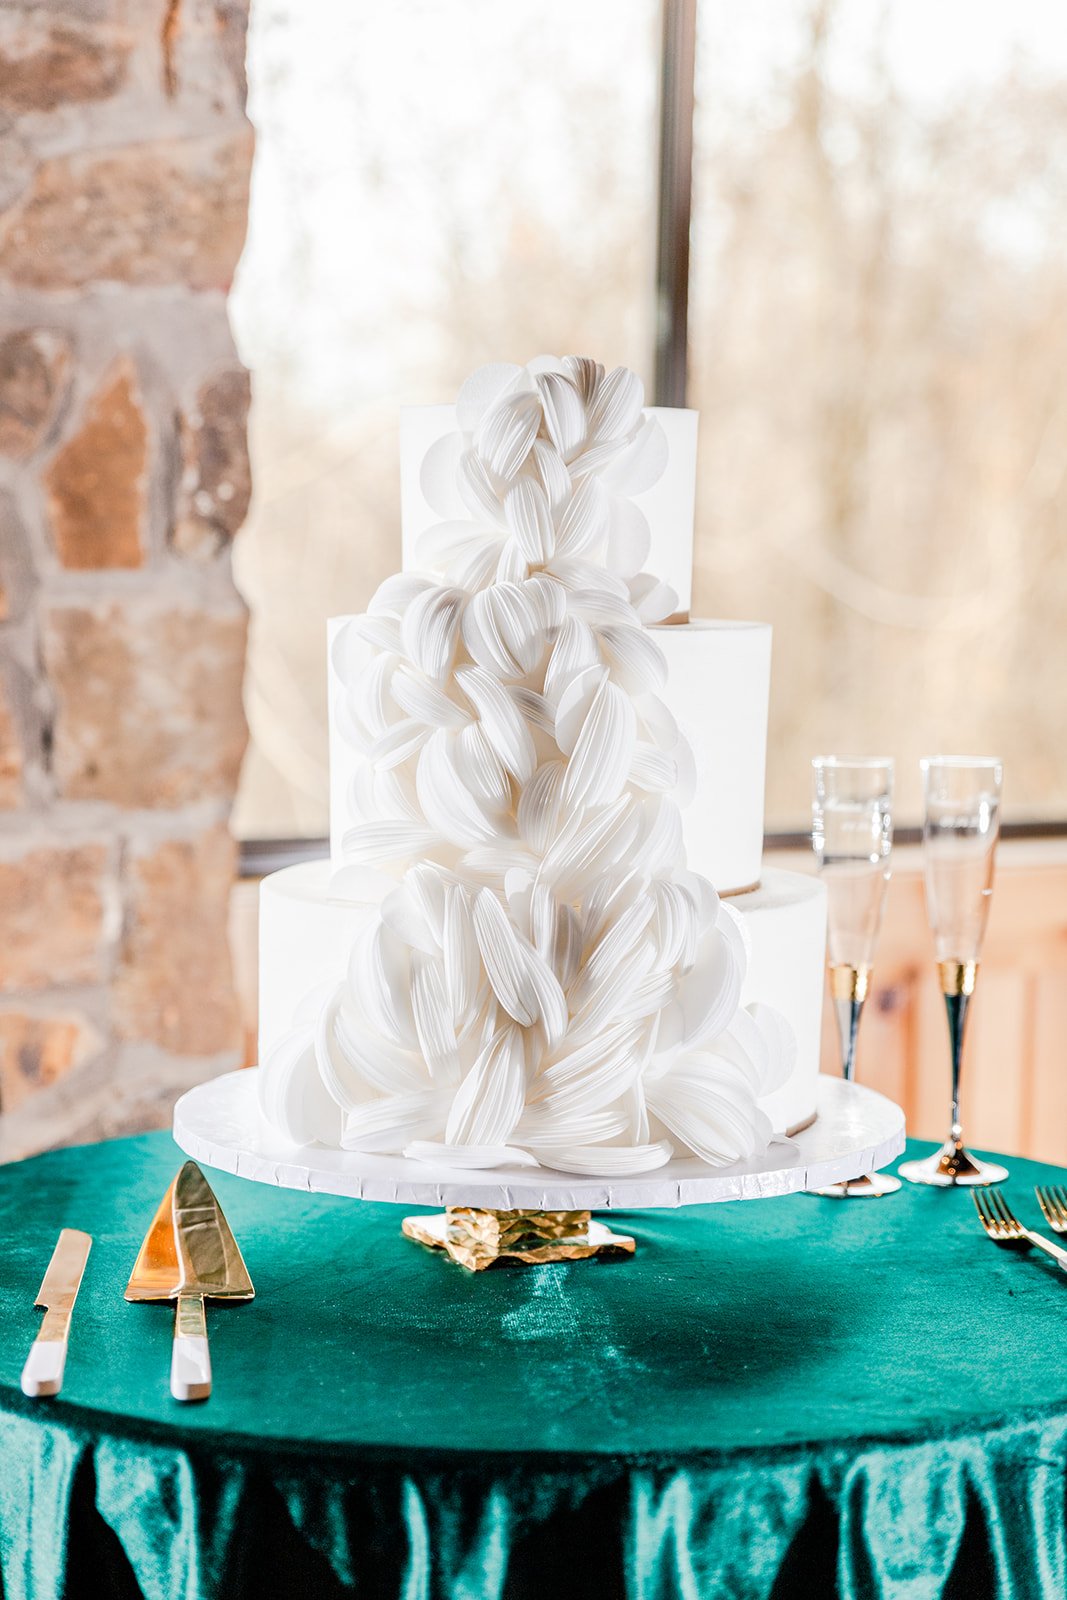 chic all white wedding cake with 3D details